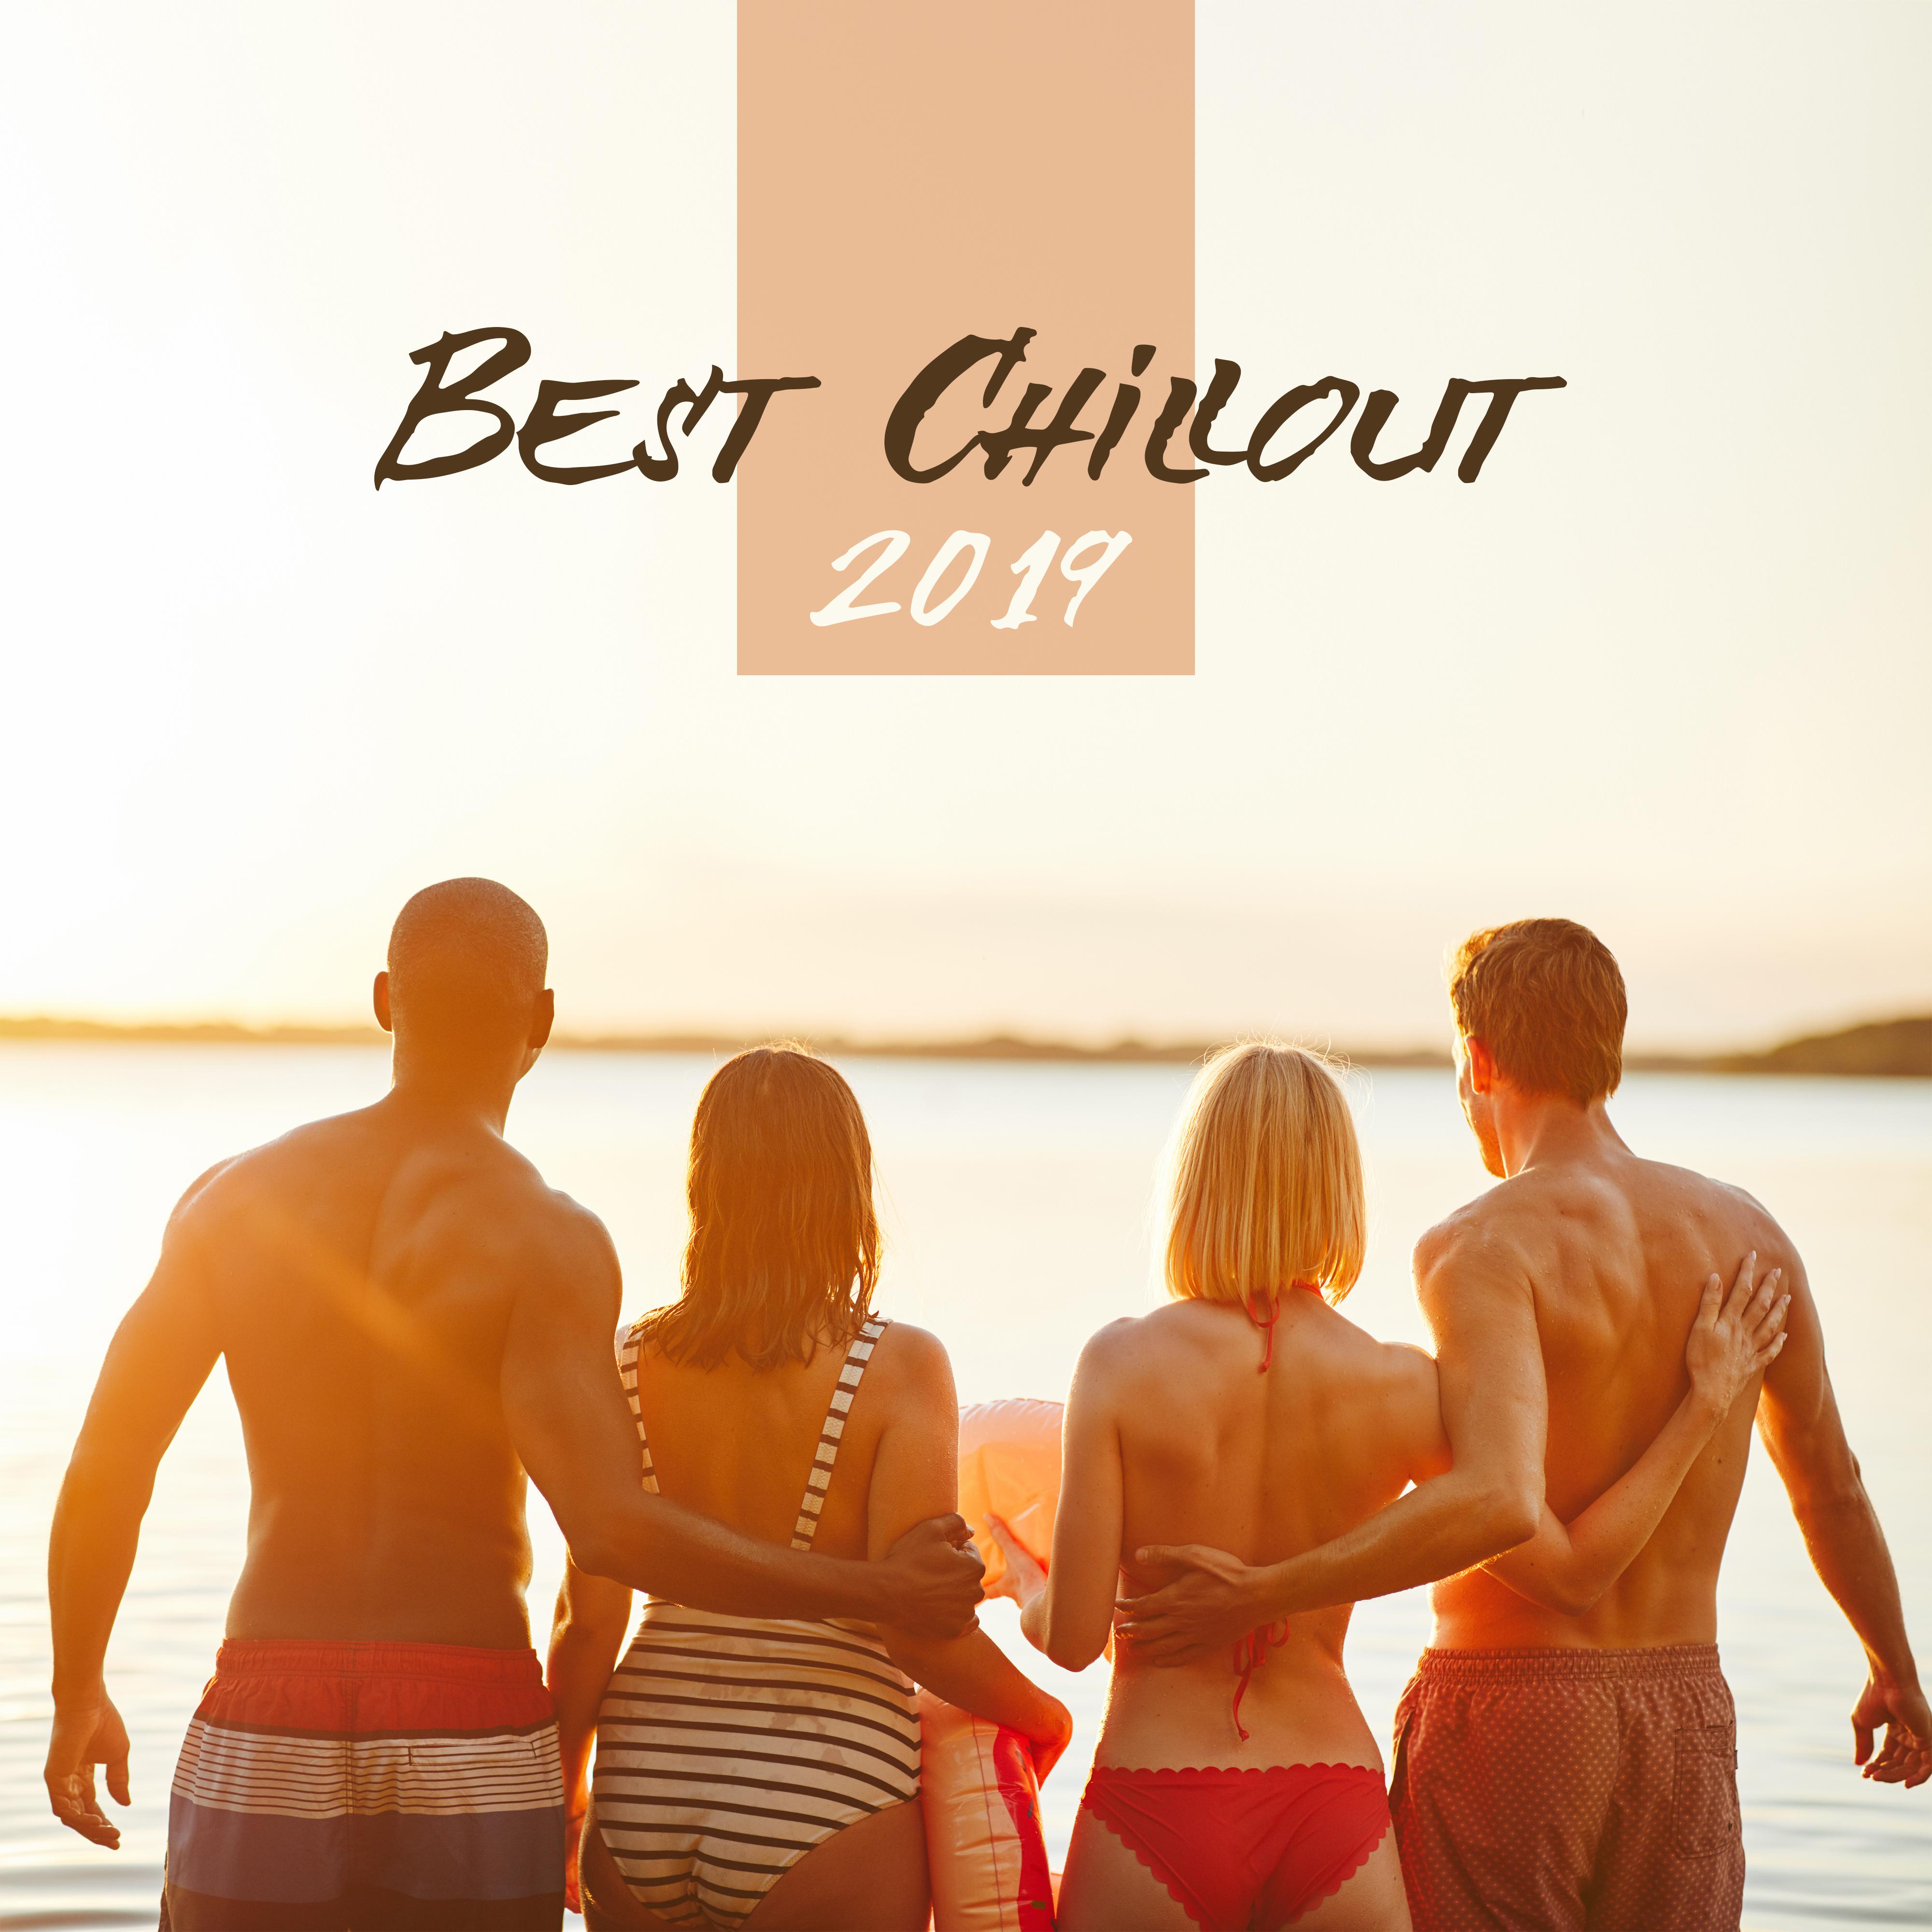 Best Chillout 2019 – Most Relaxing Electronic Chill Out Music for Total Calming Down, Full Rest on Tropical Vacation, Sunny Holiday Positive Vibrations